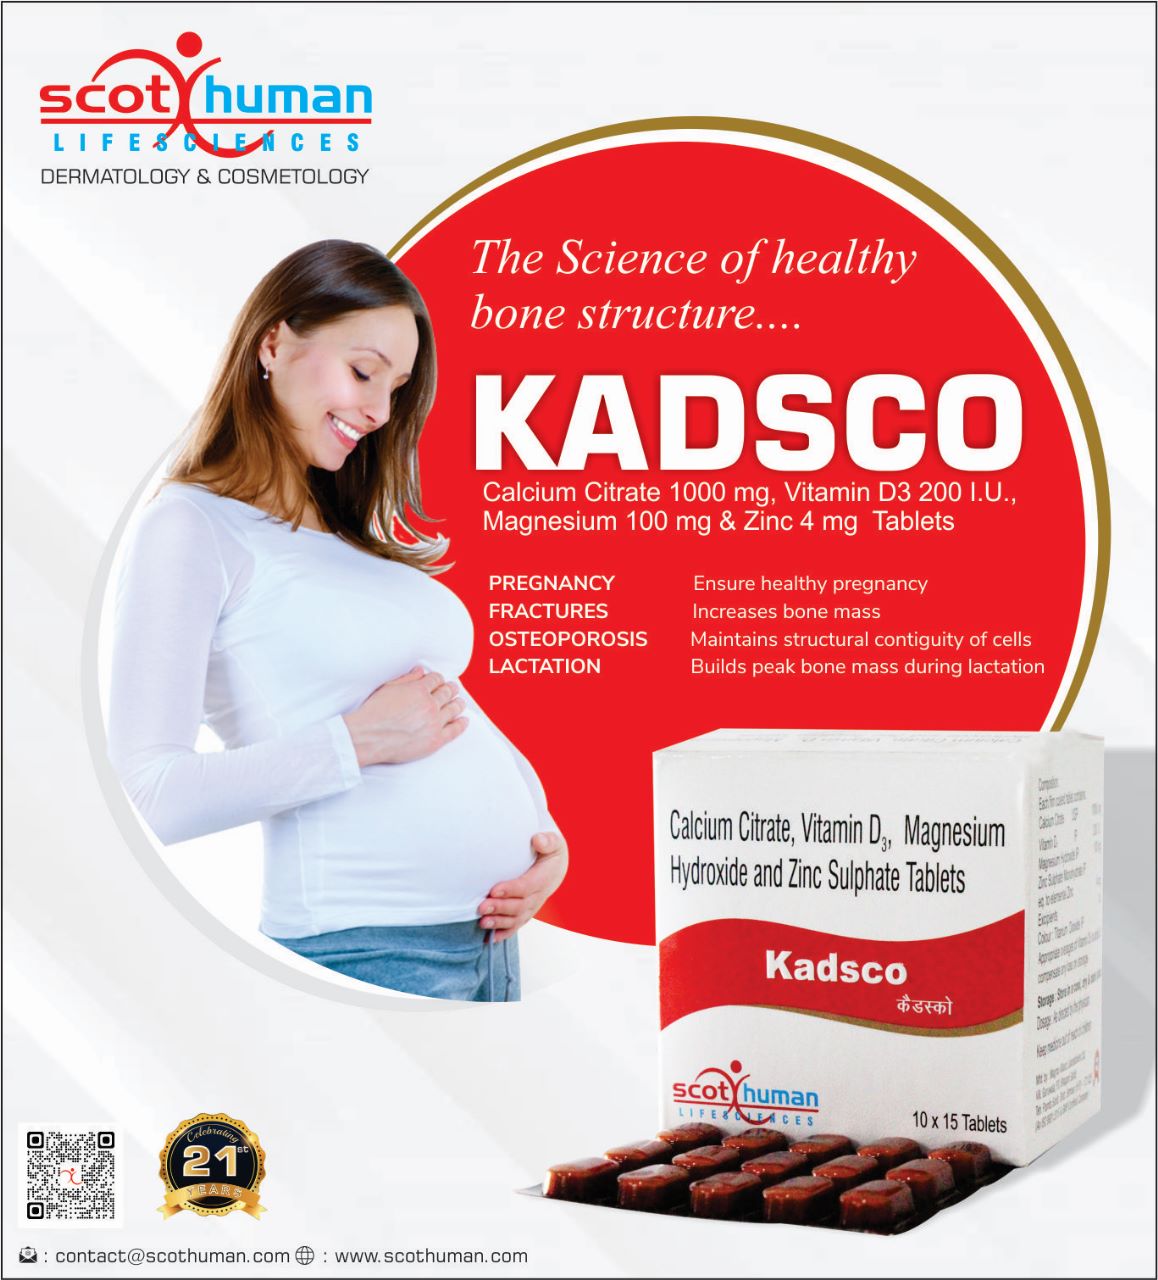 Product Name: Kadsco, Compositions of Kadsco are Calcium Citrate ,Vitamin D,Magnesium Hydroxide and Zinc Sulphate Tablets - Pharma Drugs and Chemicals